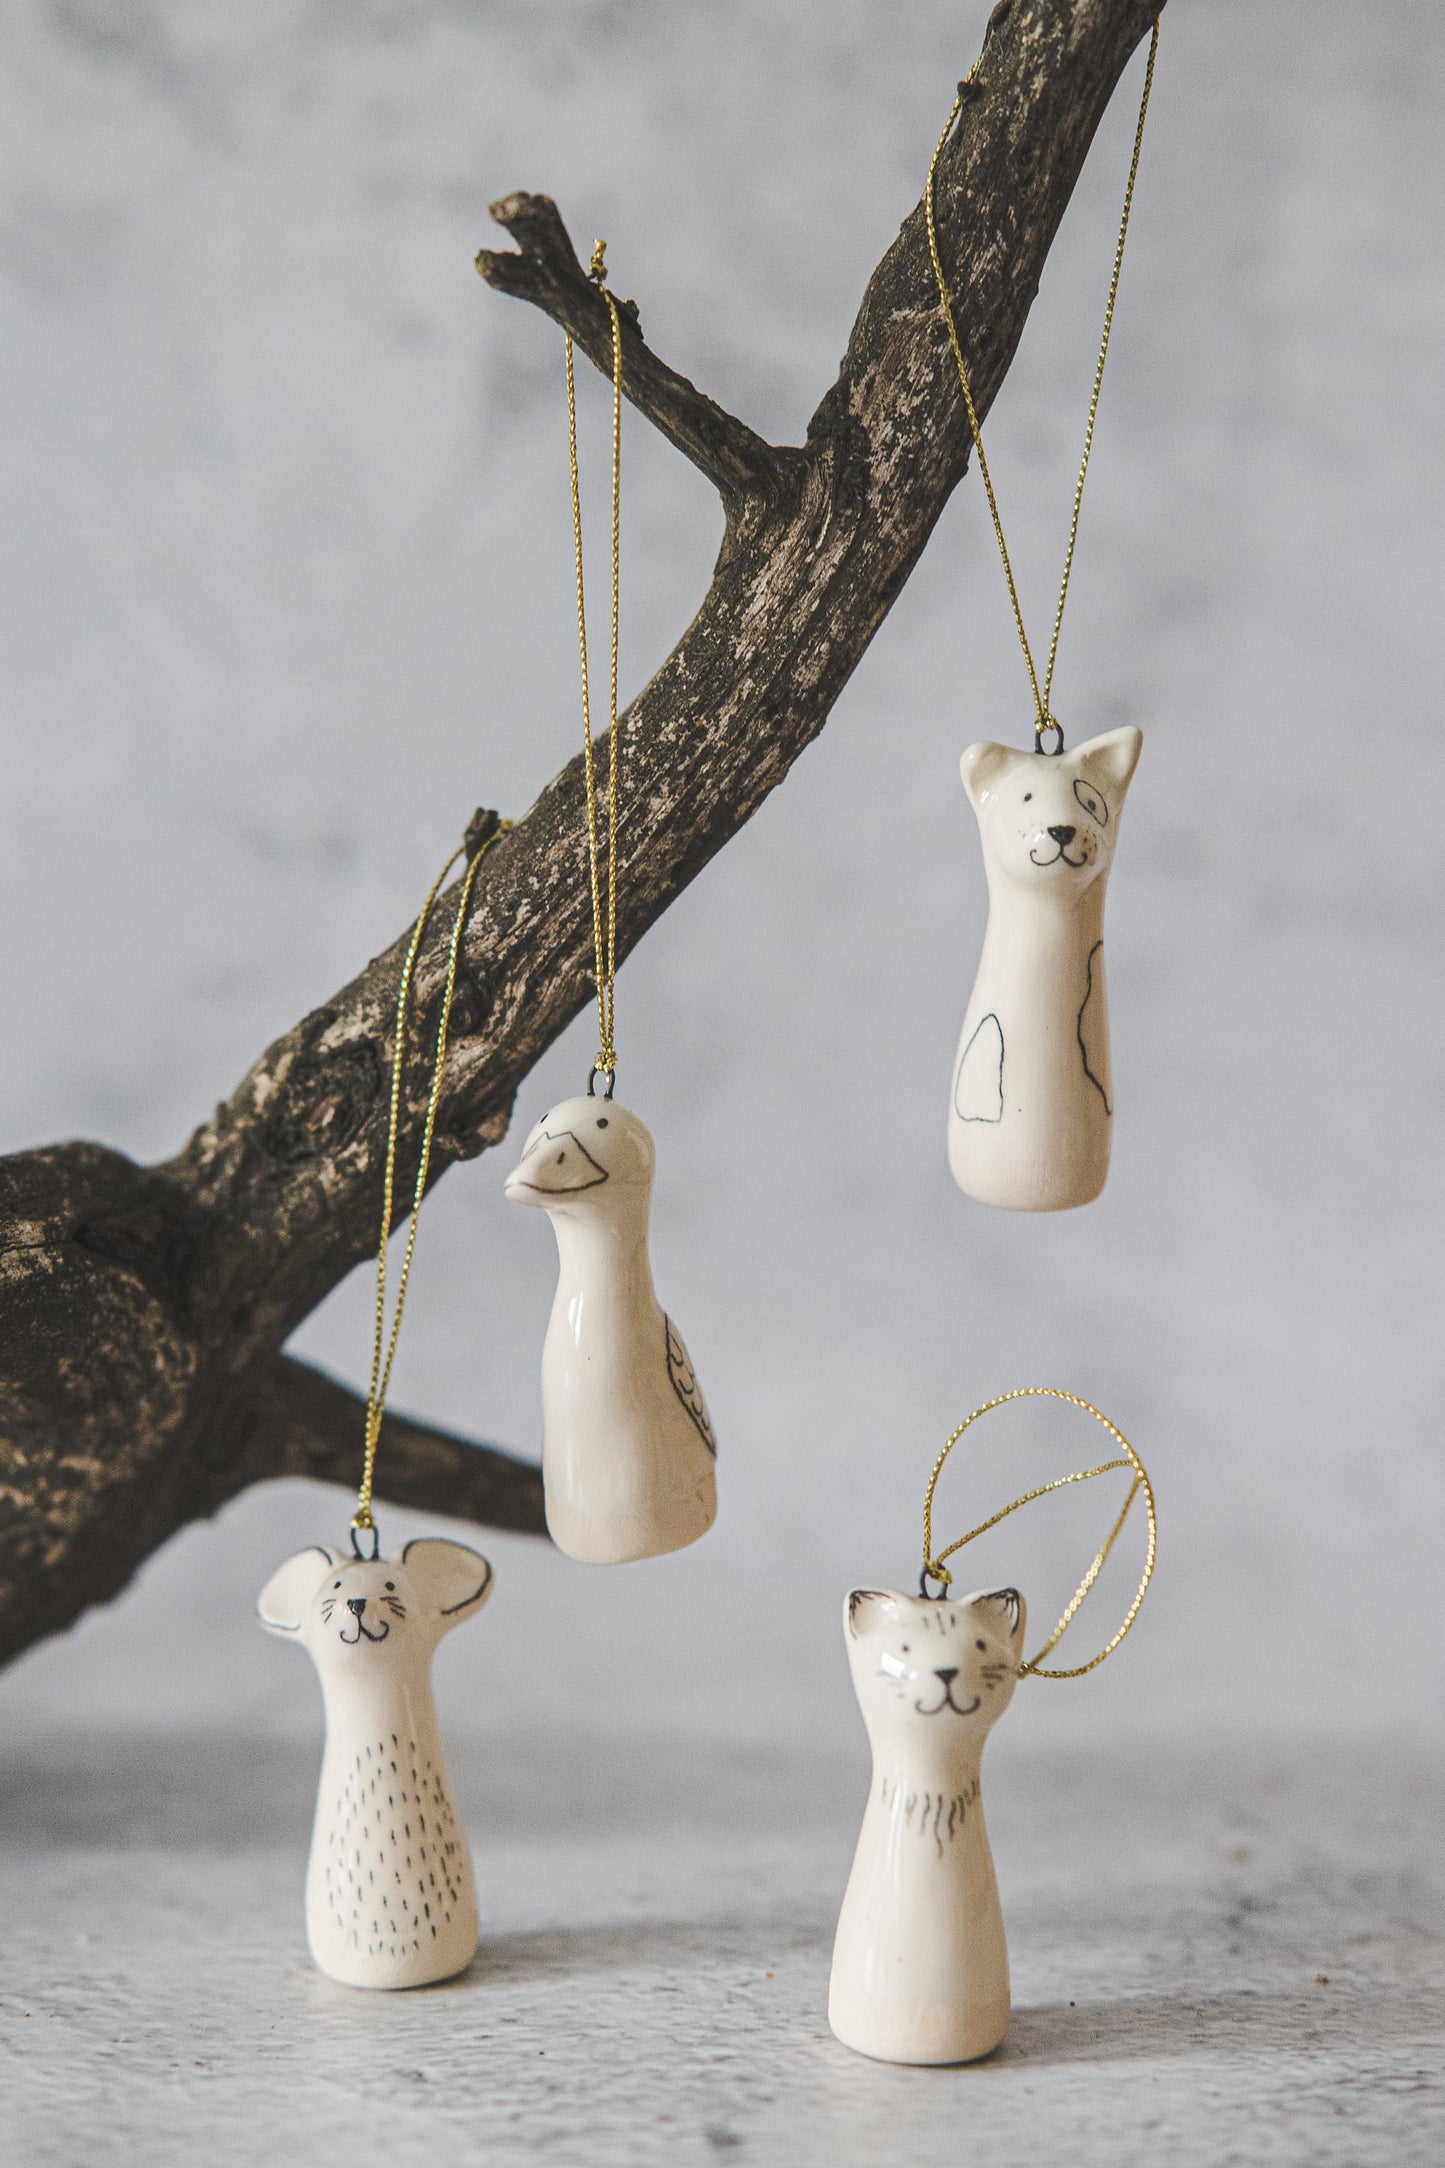 Christmas tree domestic animals decoration set of four - Dog, cat, mouse, duck ceramic Christmas ornaments gift